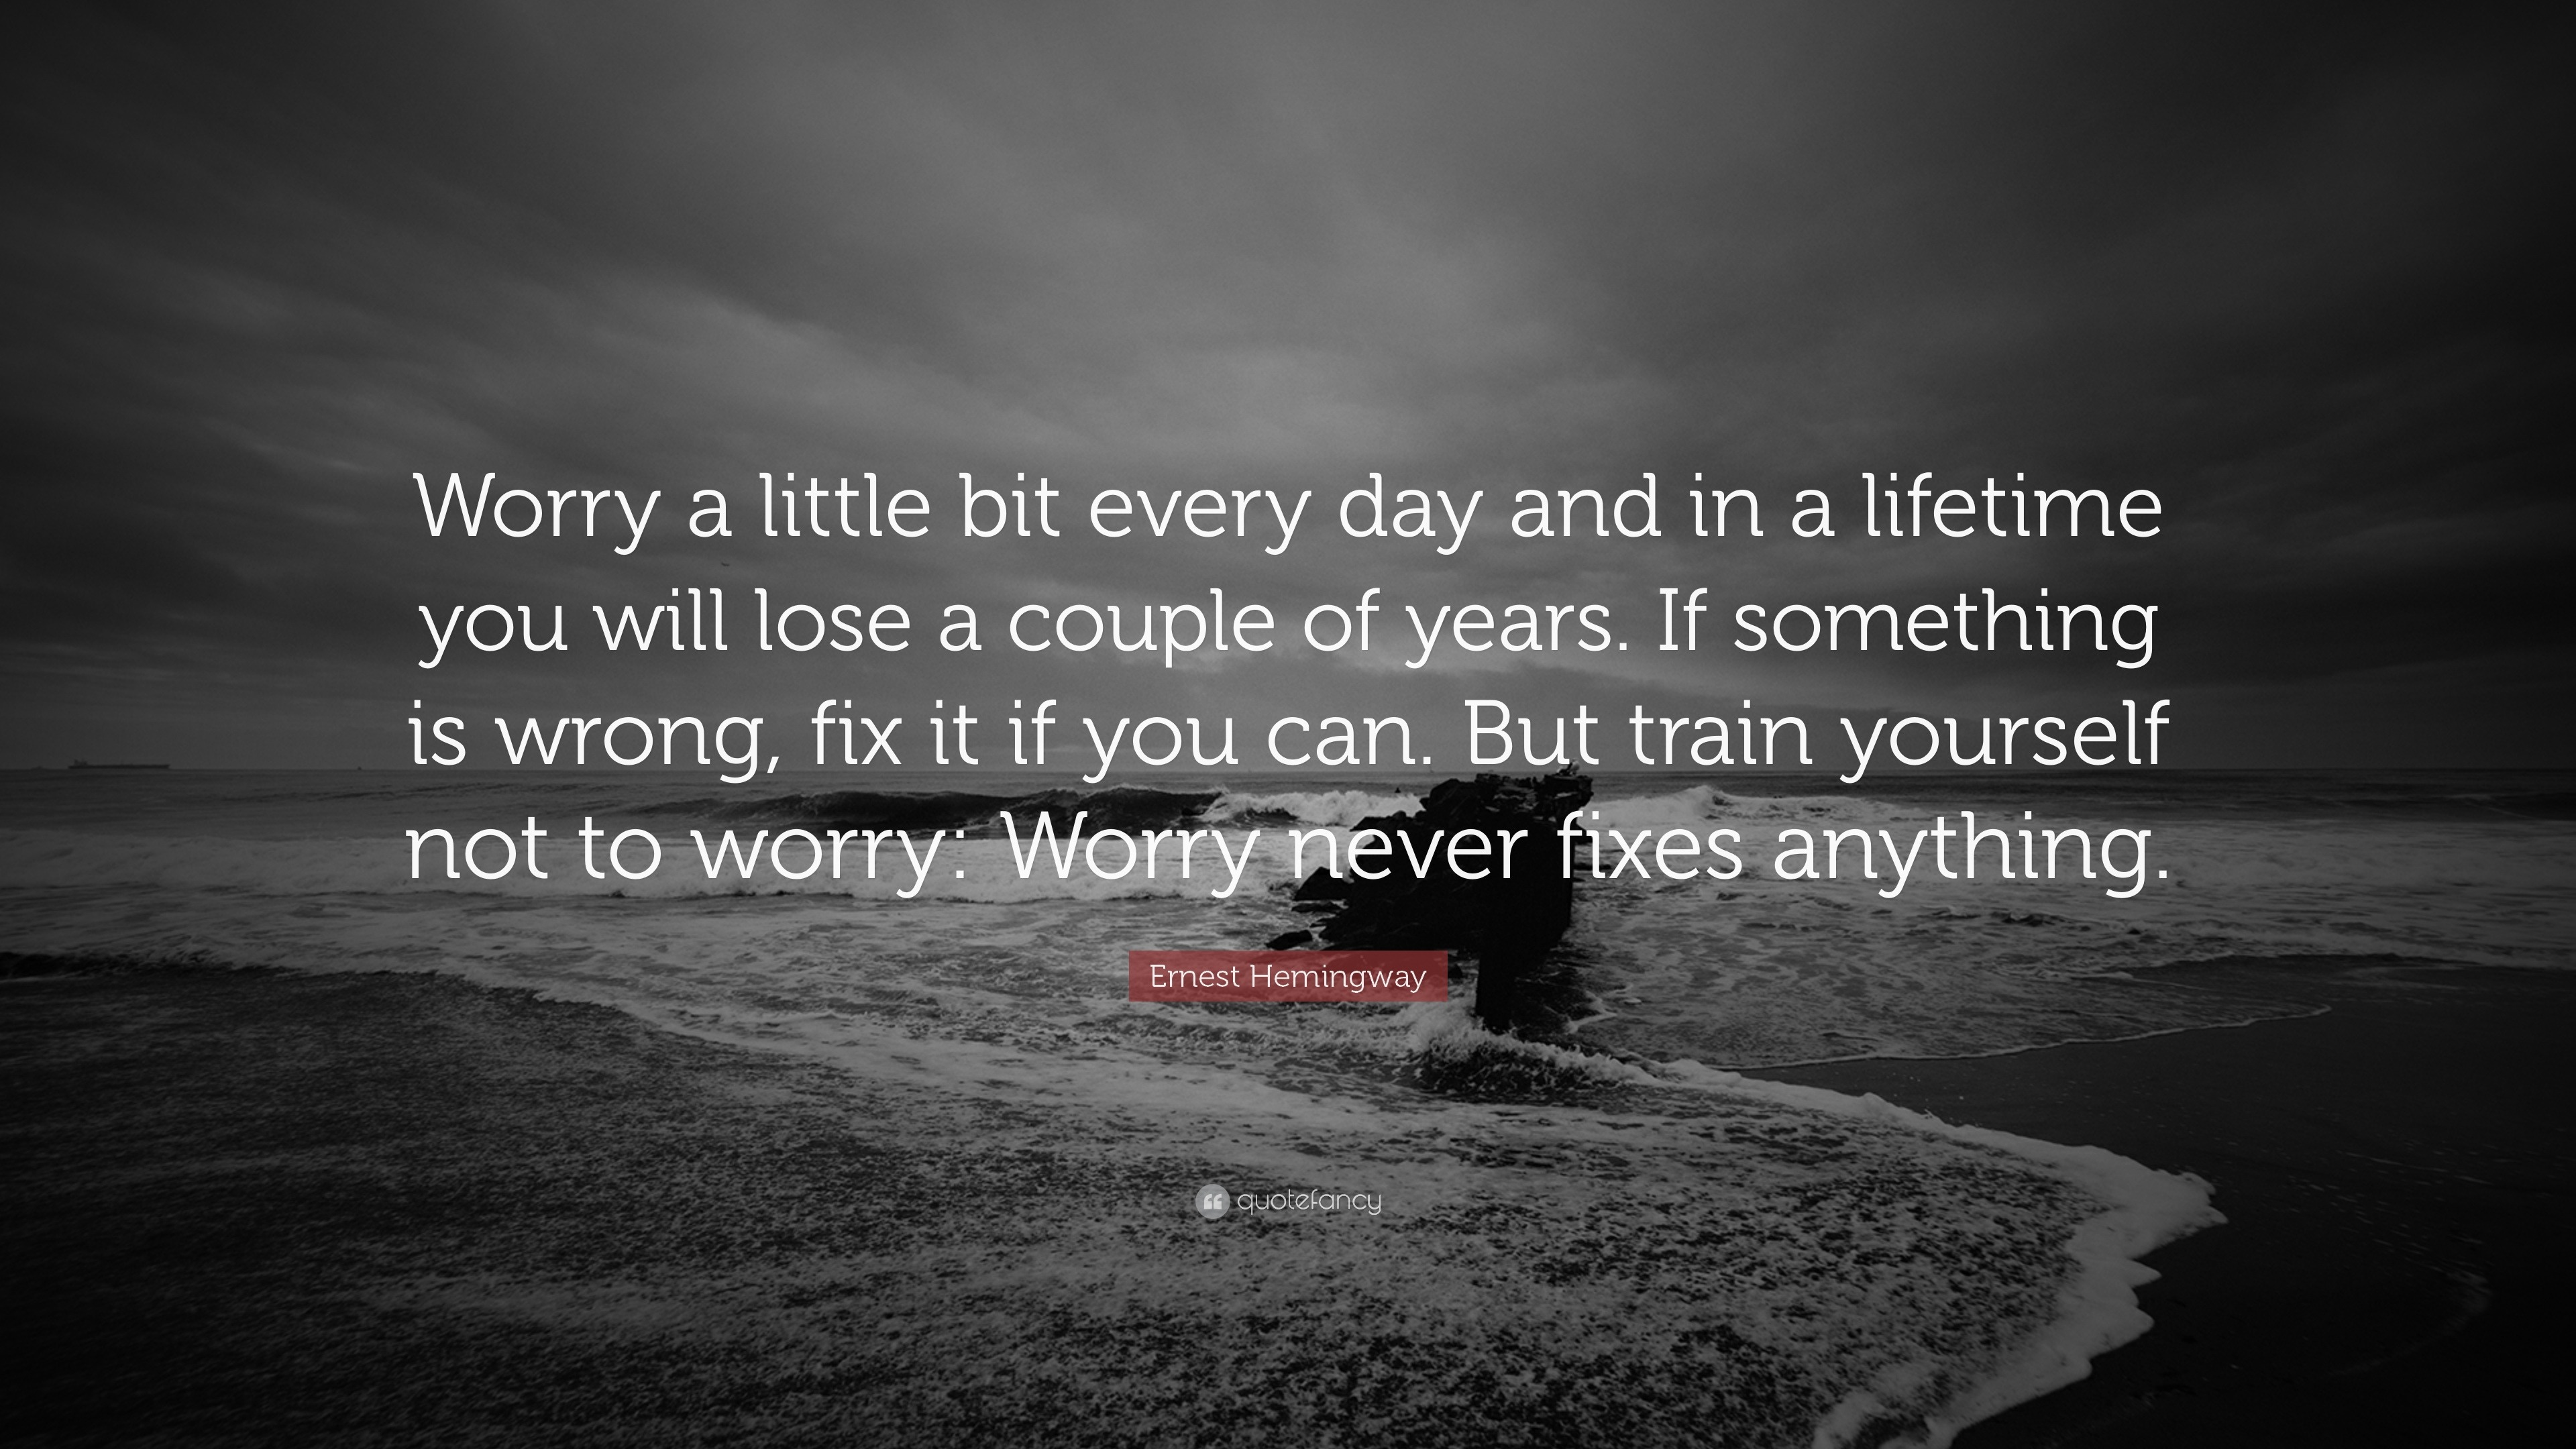 ernest hemingway quote: worry a little bit ever